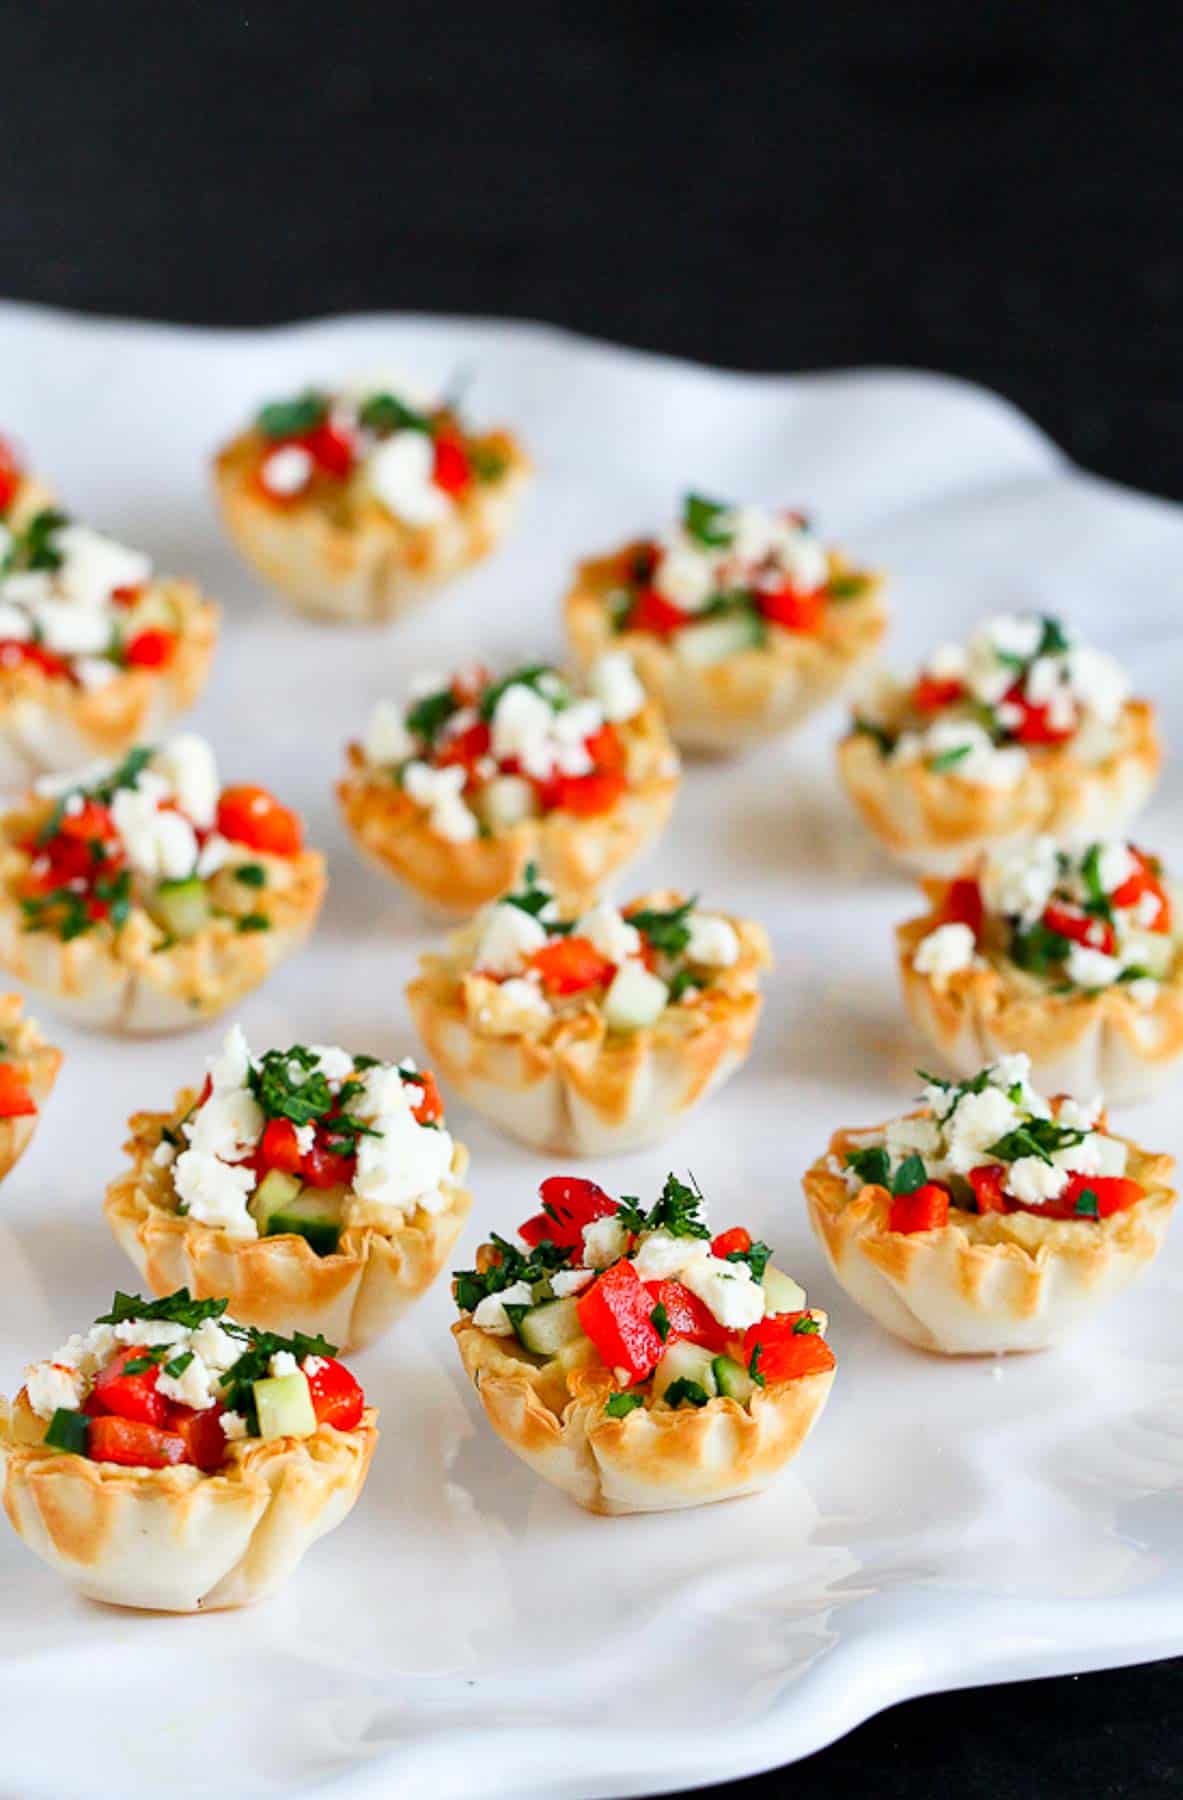 Mini phyllo cups filled with vegetable and feta, all on a white platter.